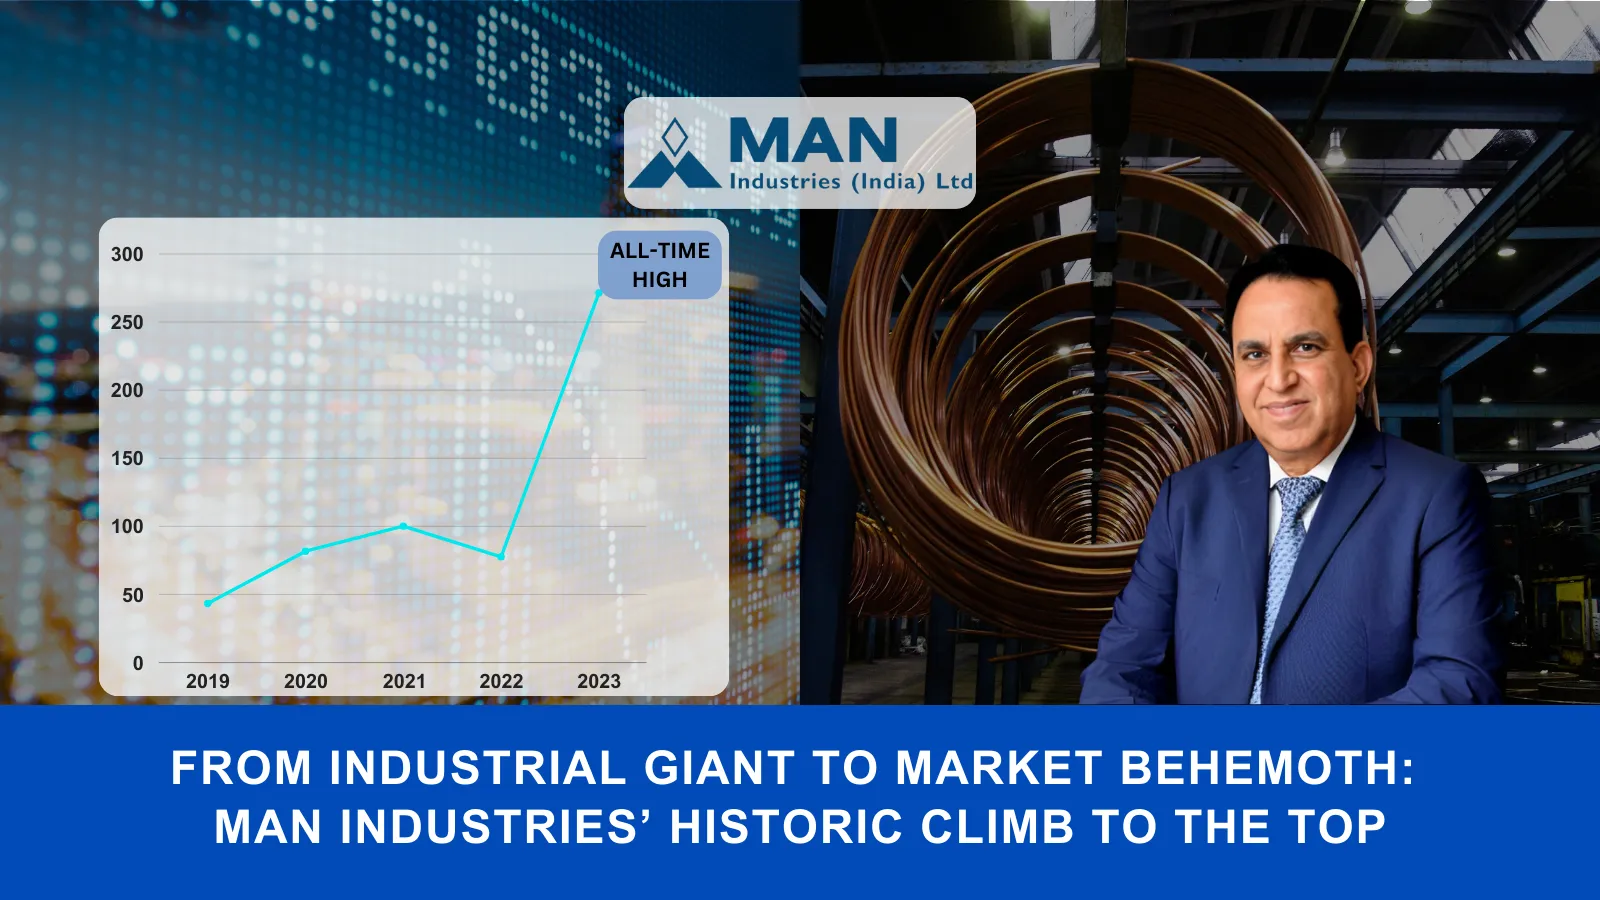 Man Industries Remarkable 279% Surge Takes it to All-Time High